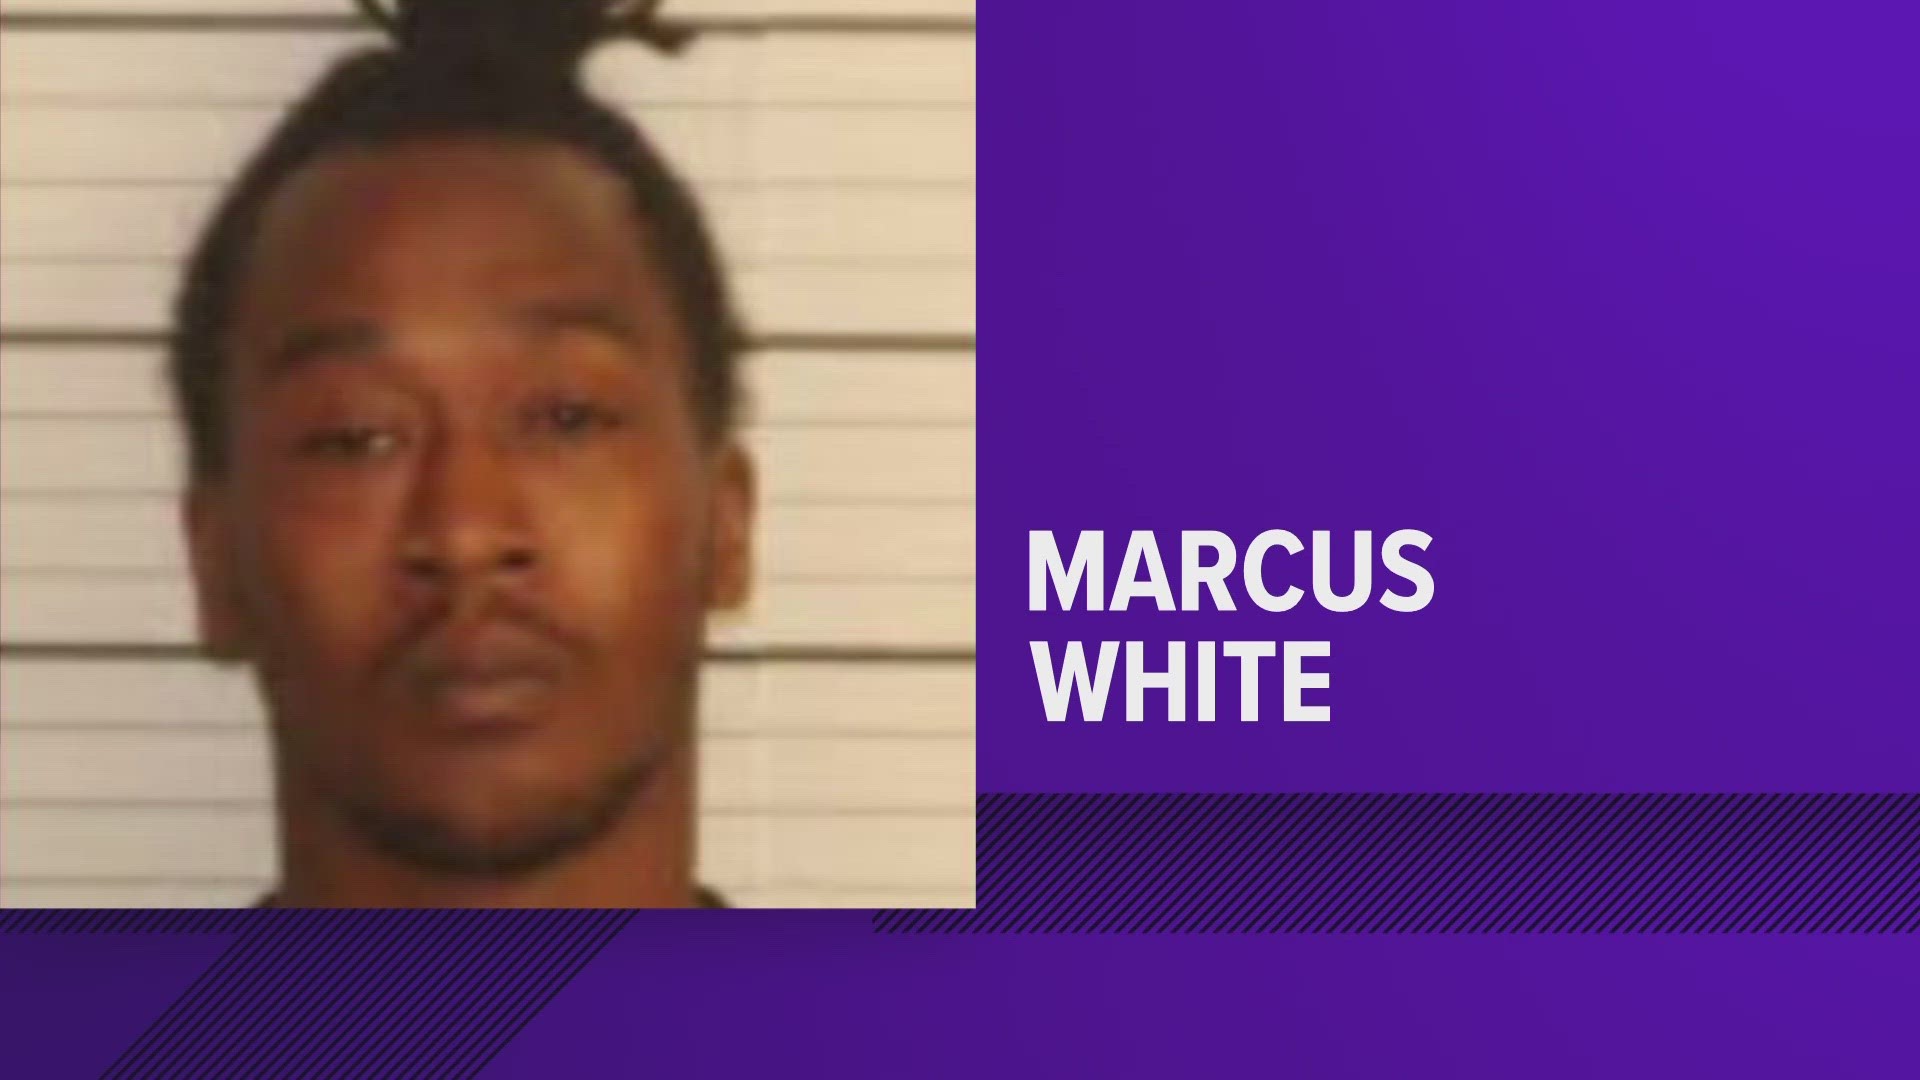 Marcus James White was arrested Monday by U.S. Marshals in Memphis for the April incident.